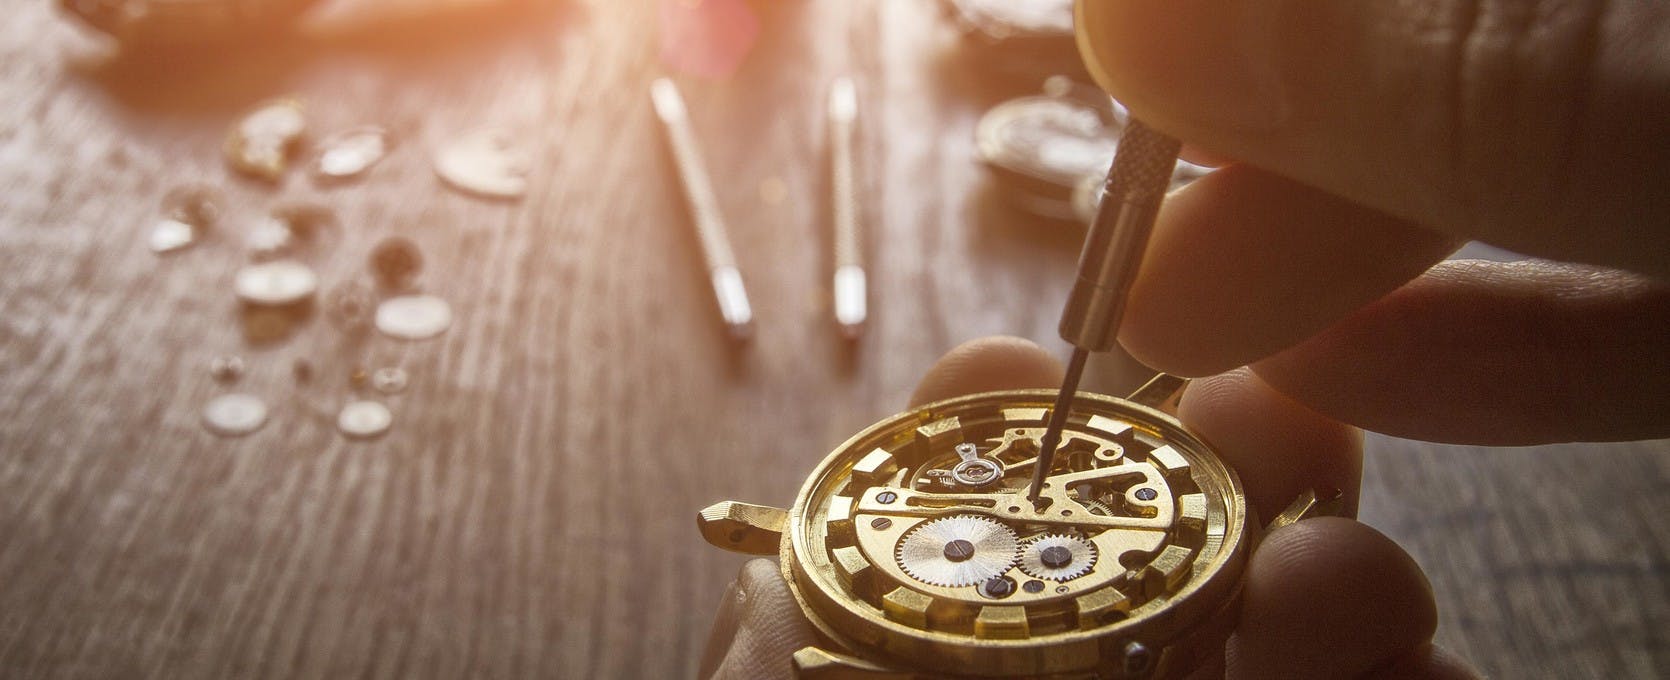 Person fixing the inside of a watch